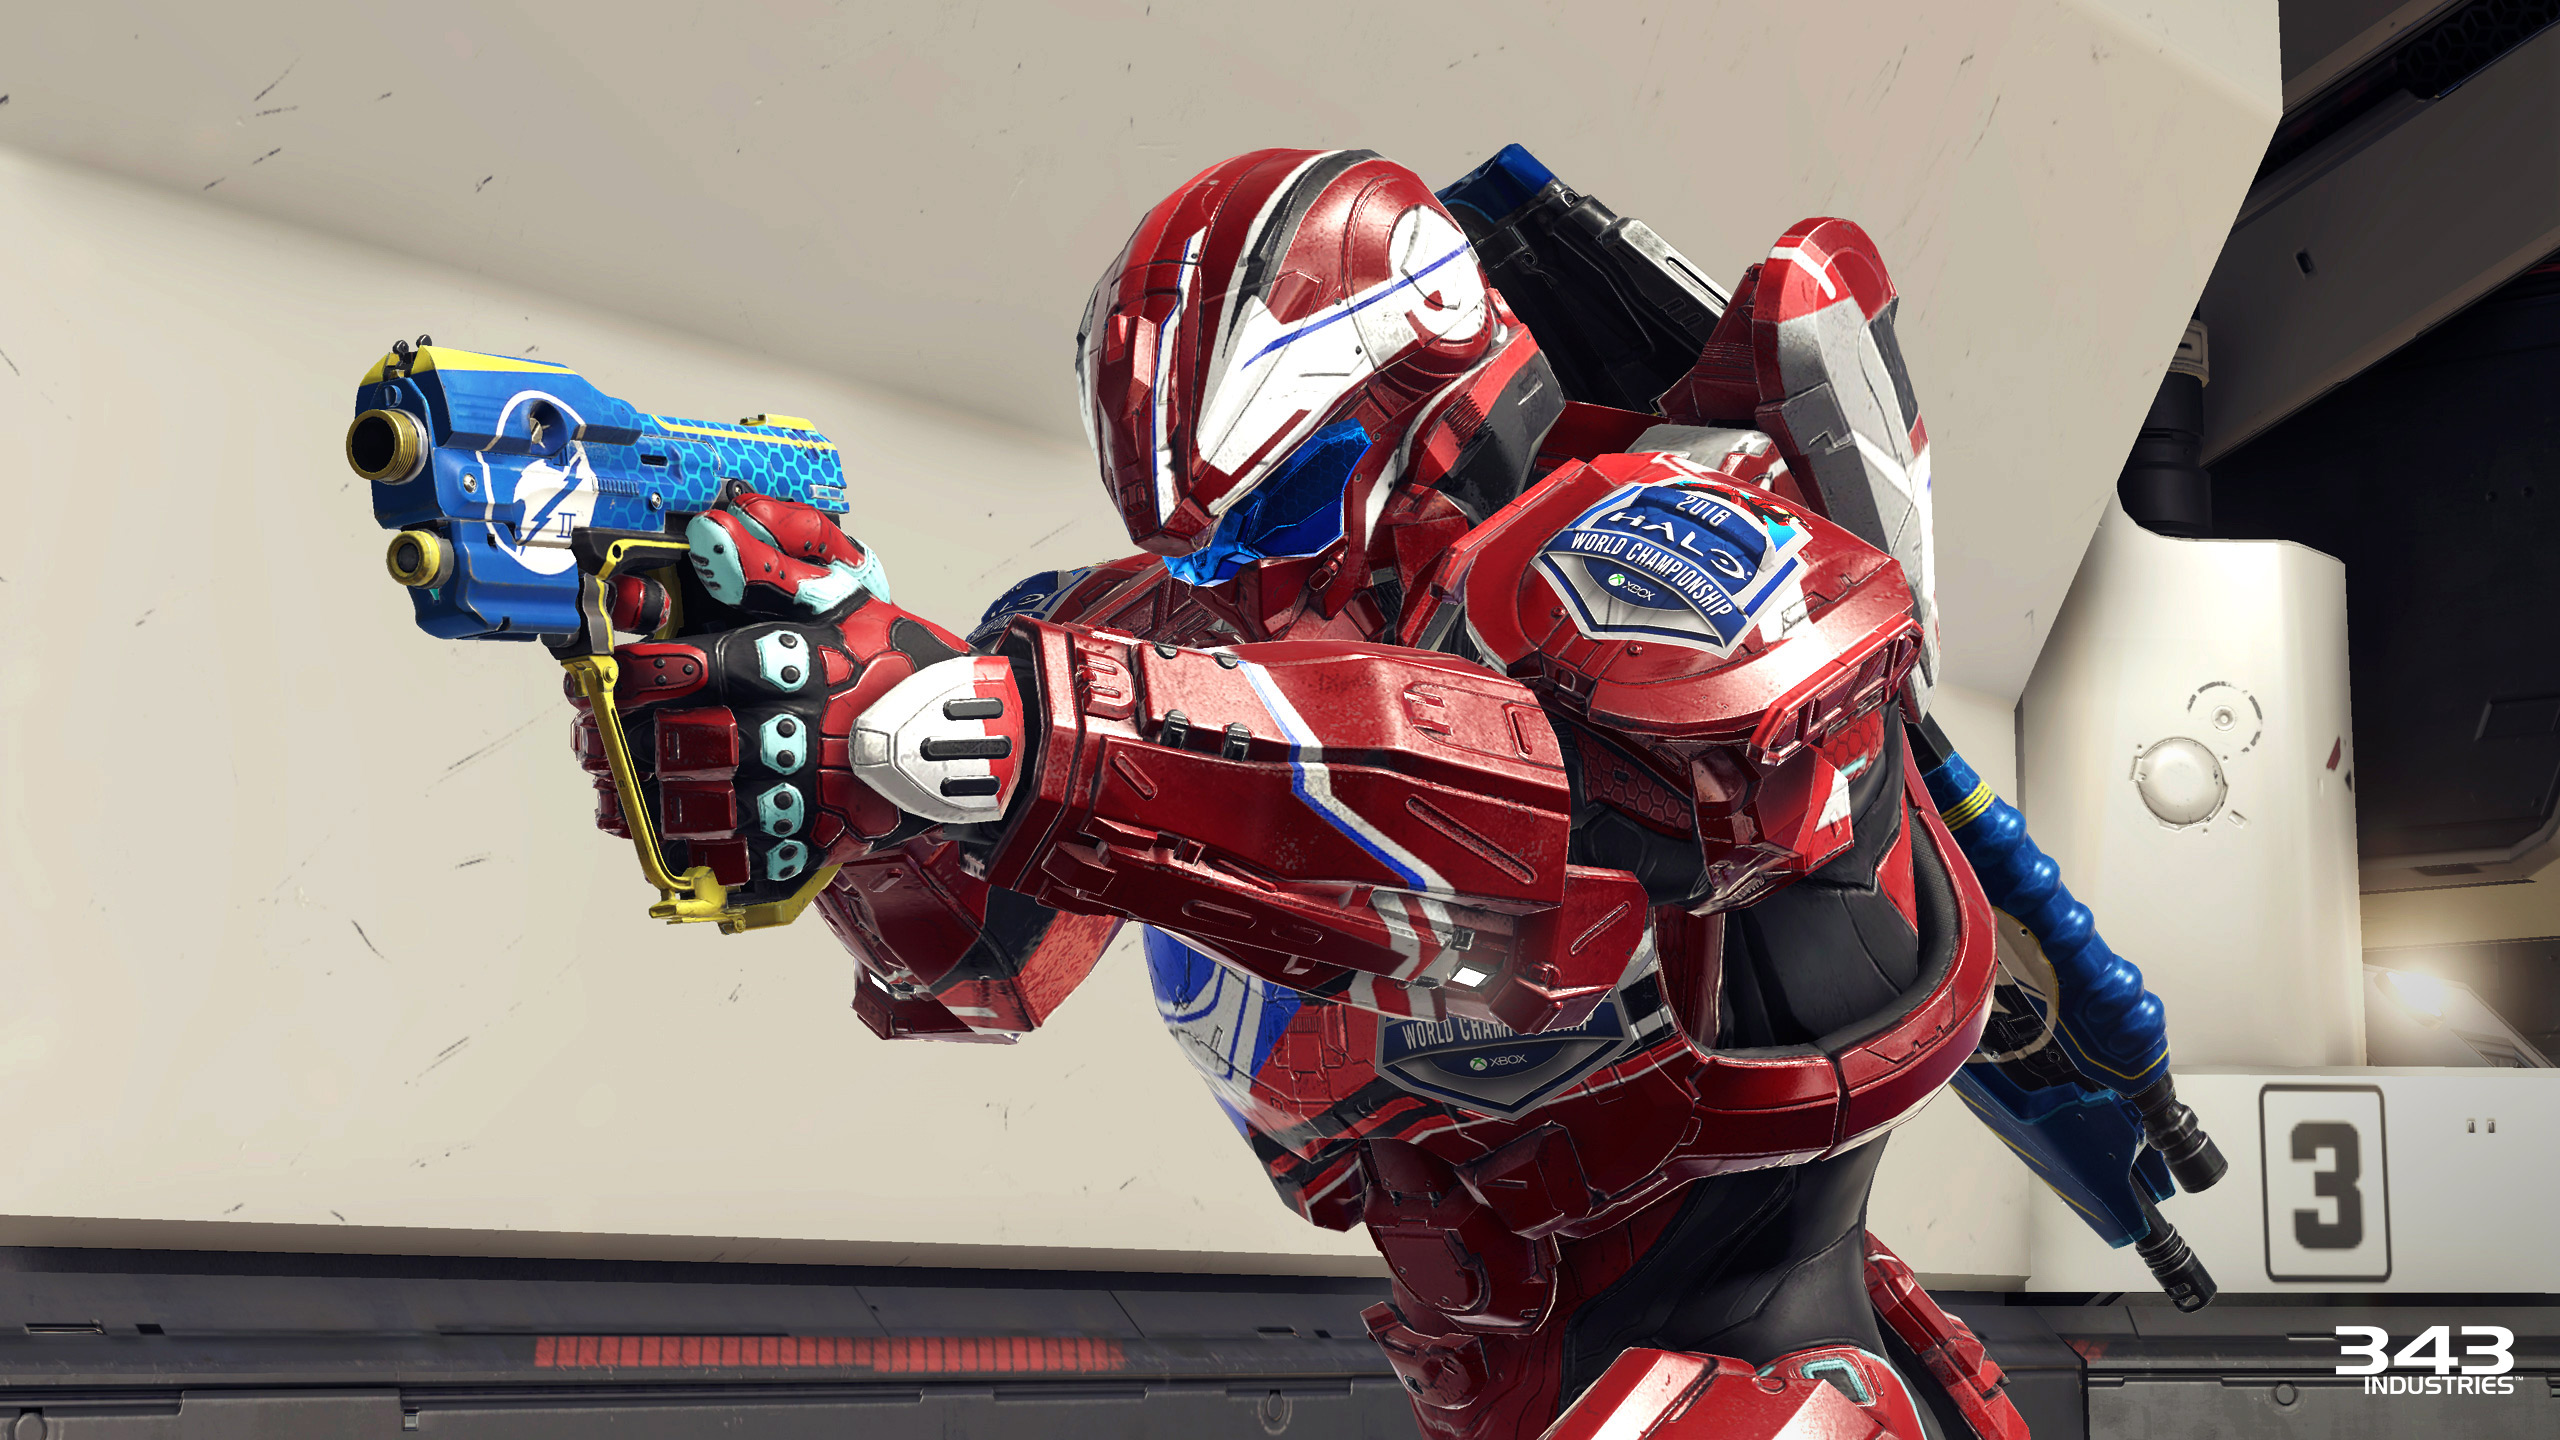 Halo 5: Guardians – Spartan’s Armory Pack